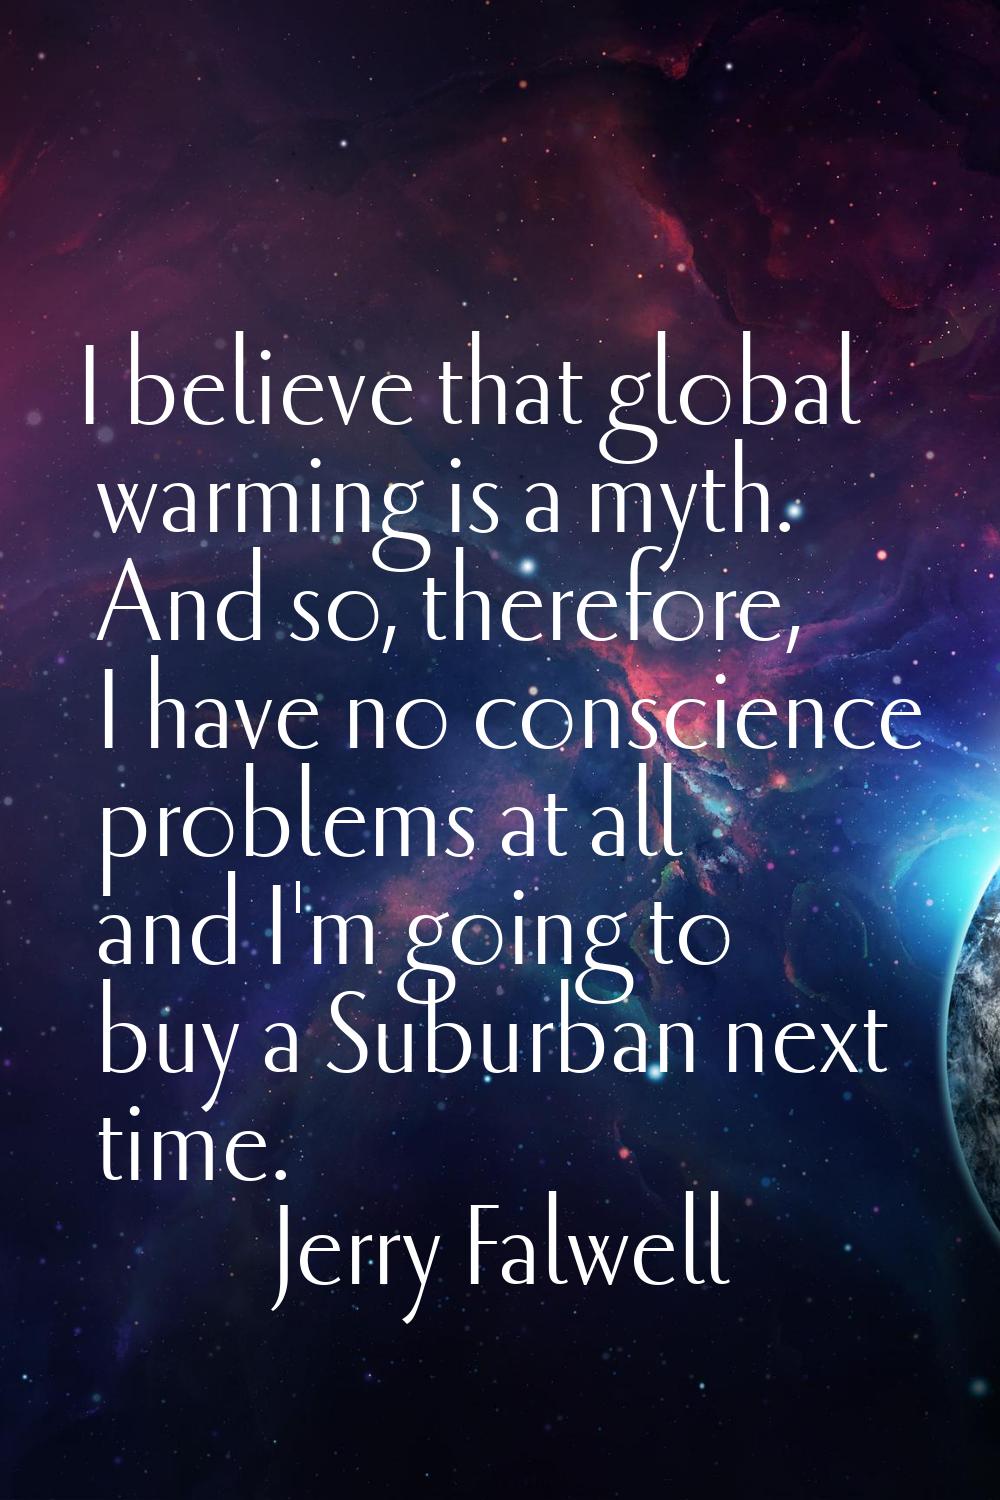 I believe that global warming is a myth. And so, therefore, I have no conscience problems at all an